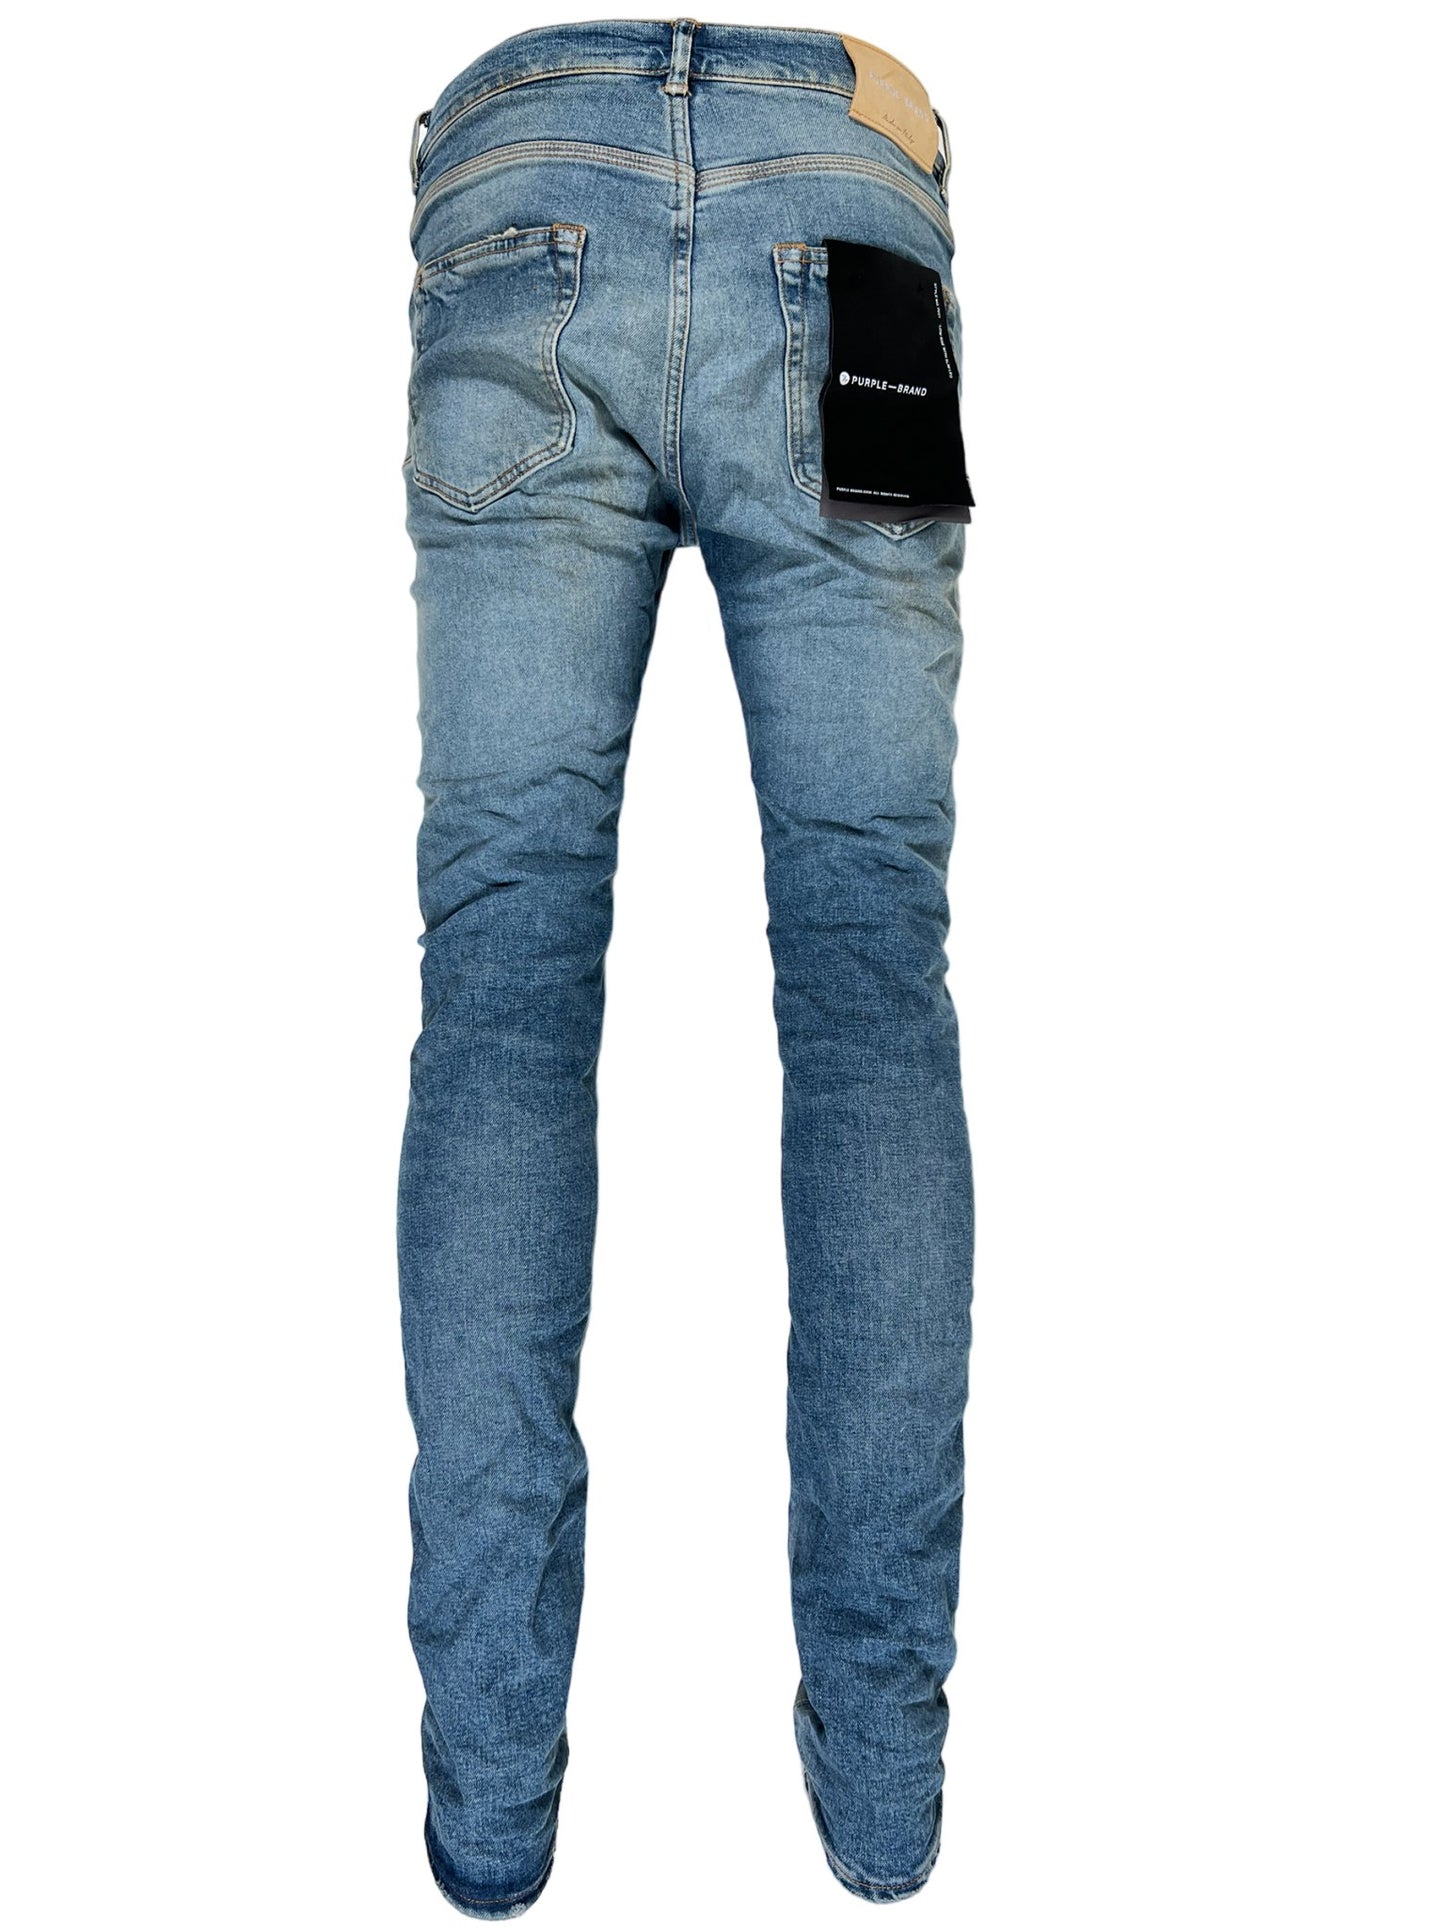 A pair of PURPLE BRAND jeans with a pocket on the back, crafted from stretch denim.